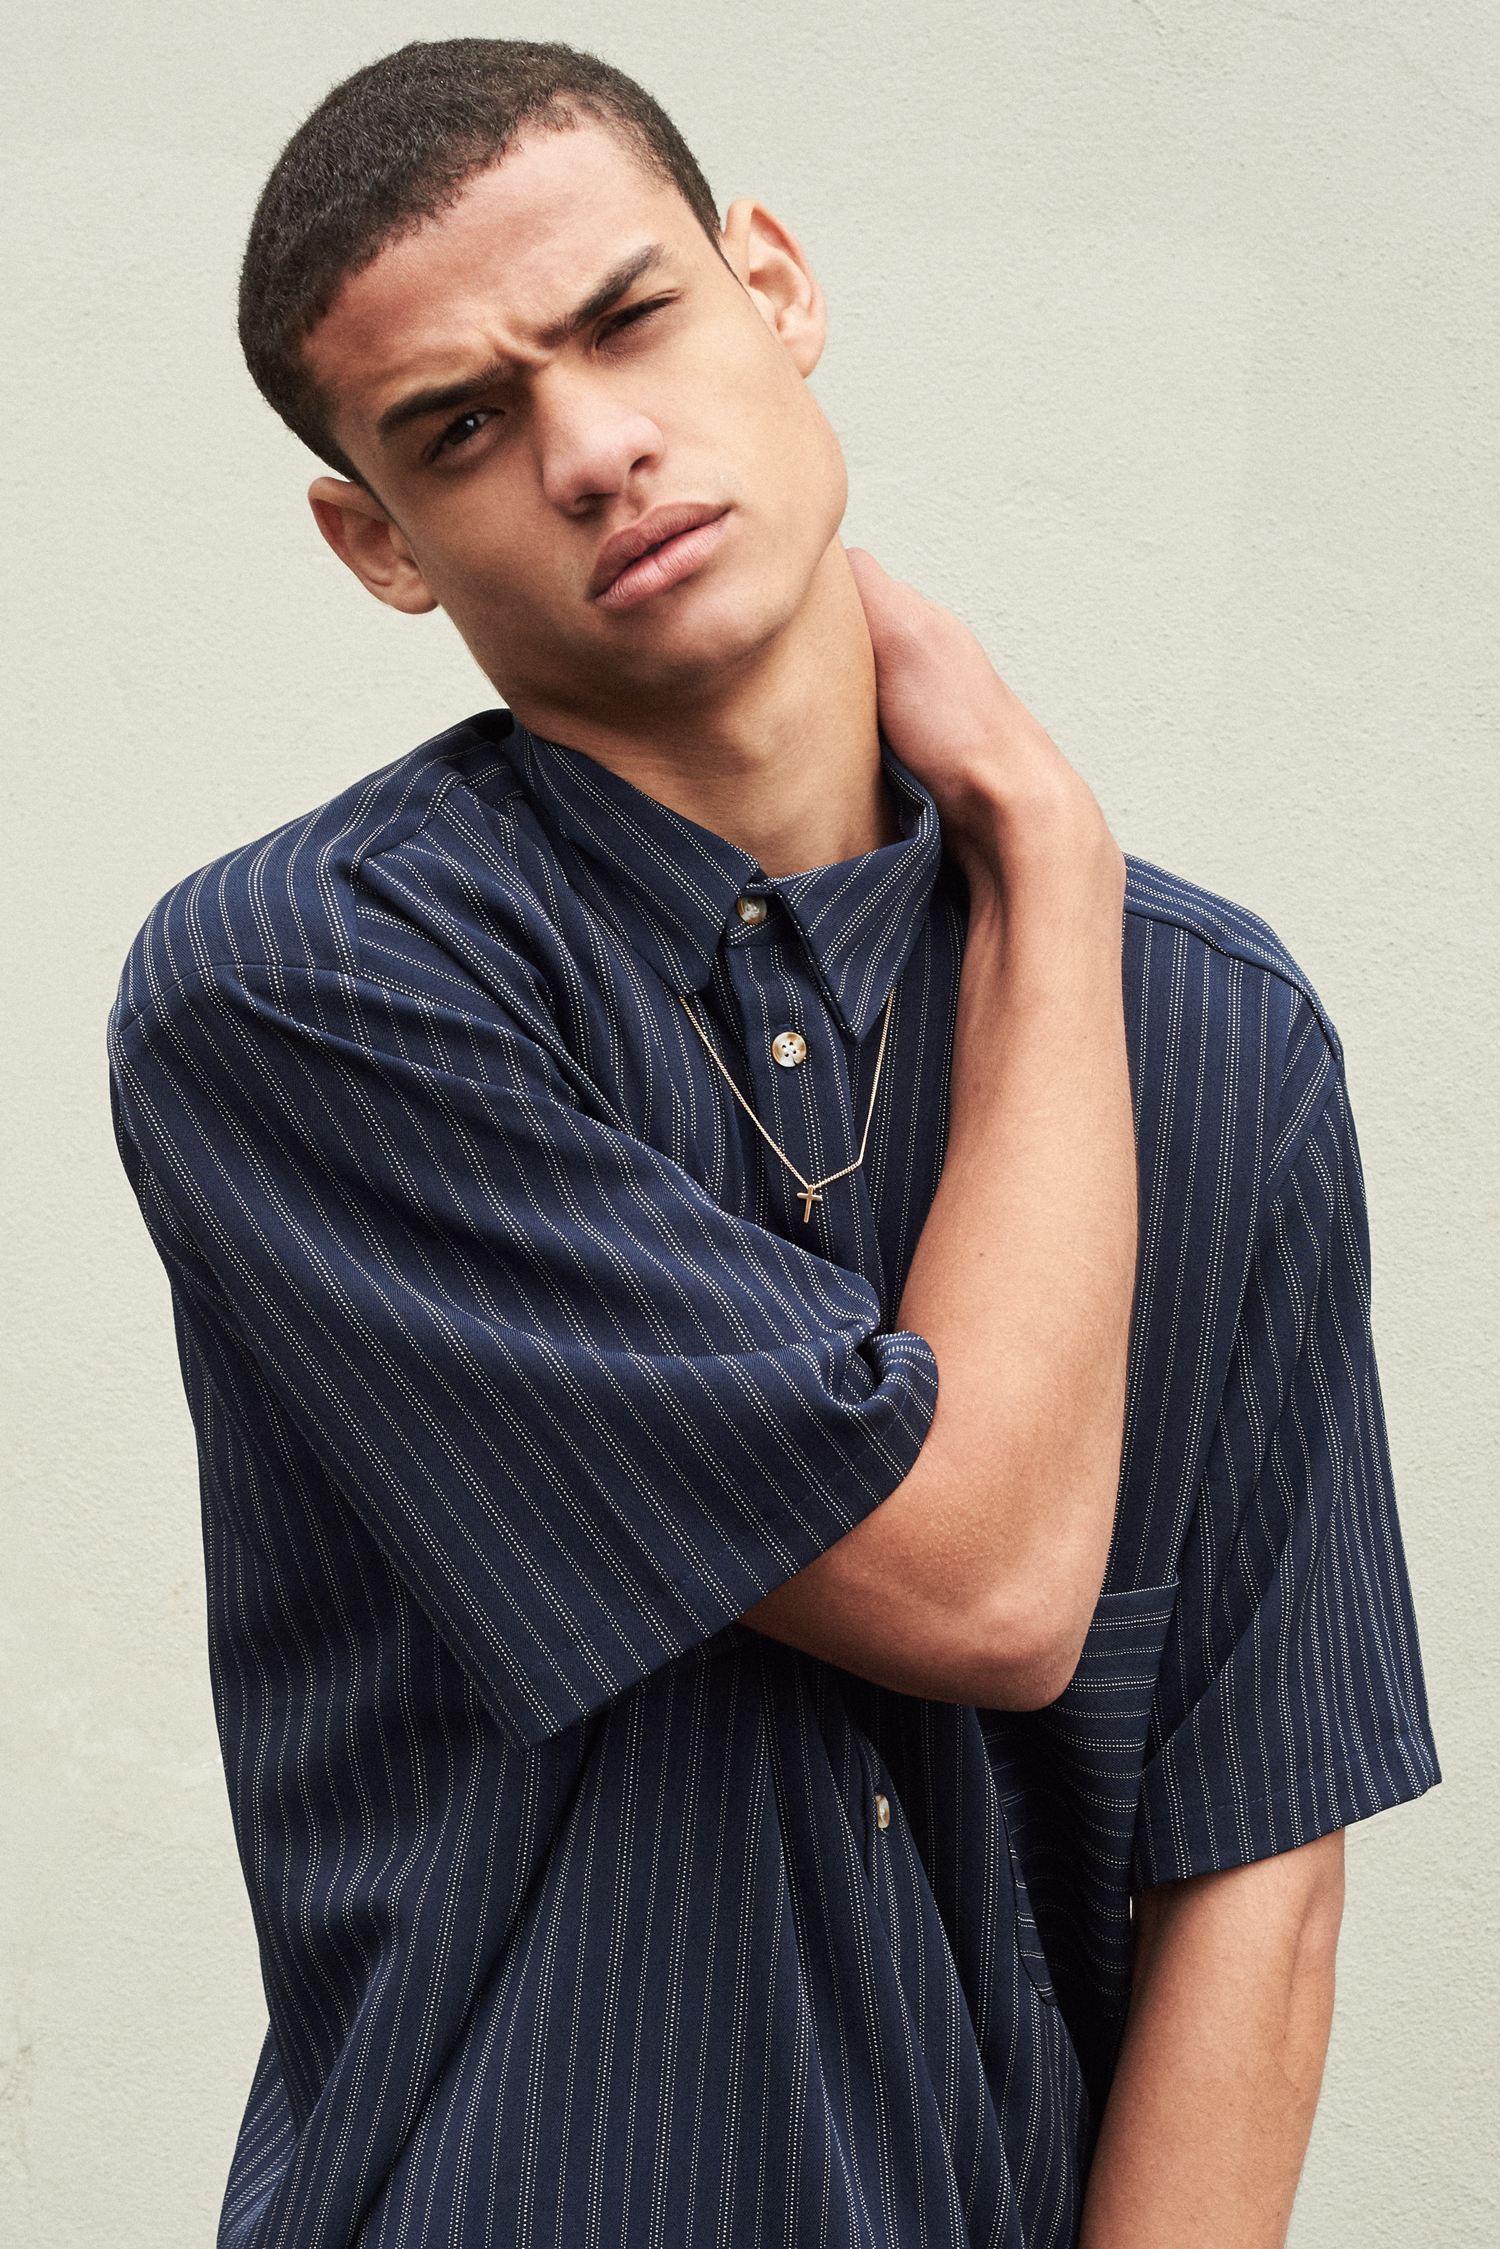 PAUSE Editorial: Pinstripe – PAUSE Online | Men's Fashion, Street Style ...